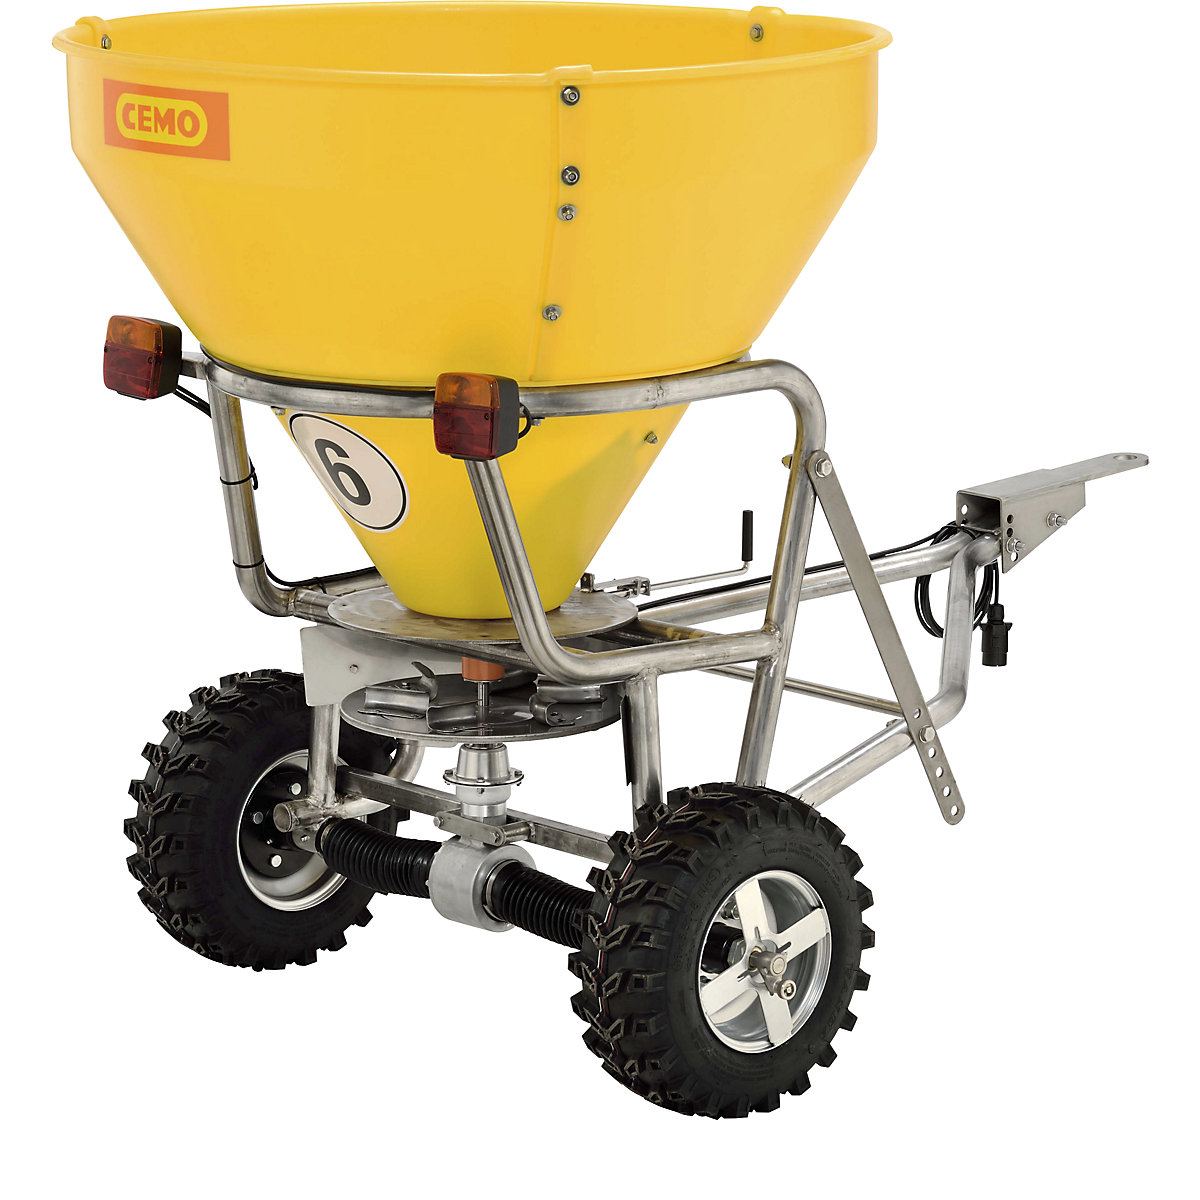 Large salt spreader – CEMO, scatter widths up to 5 m, container capacity 300 l-4